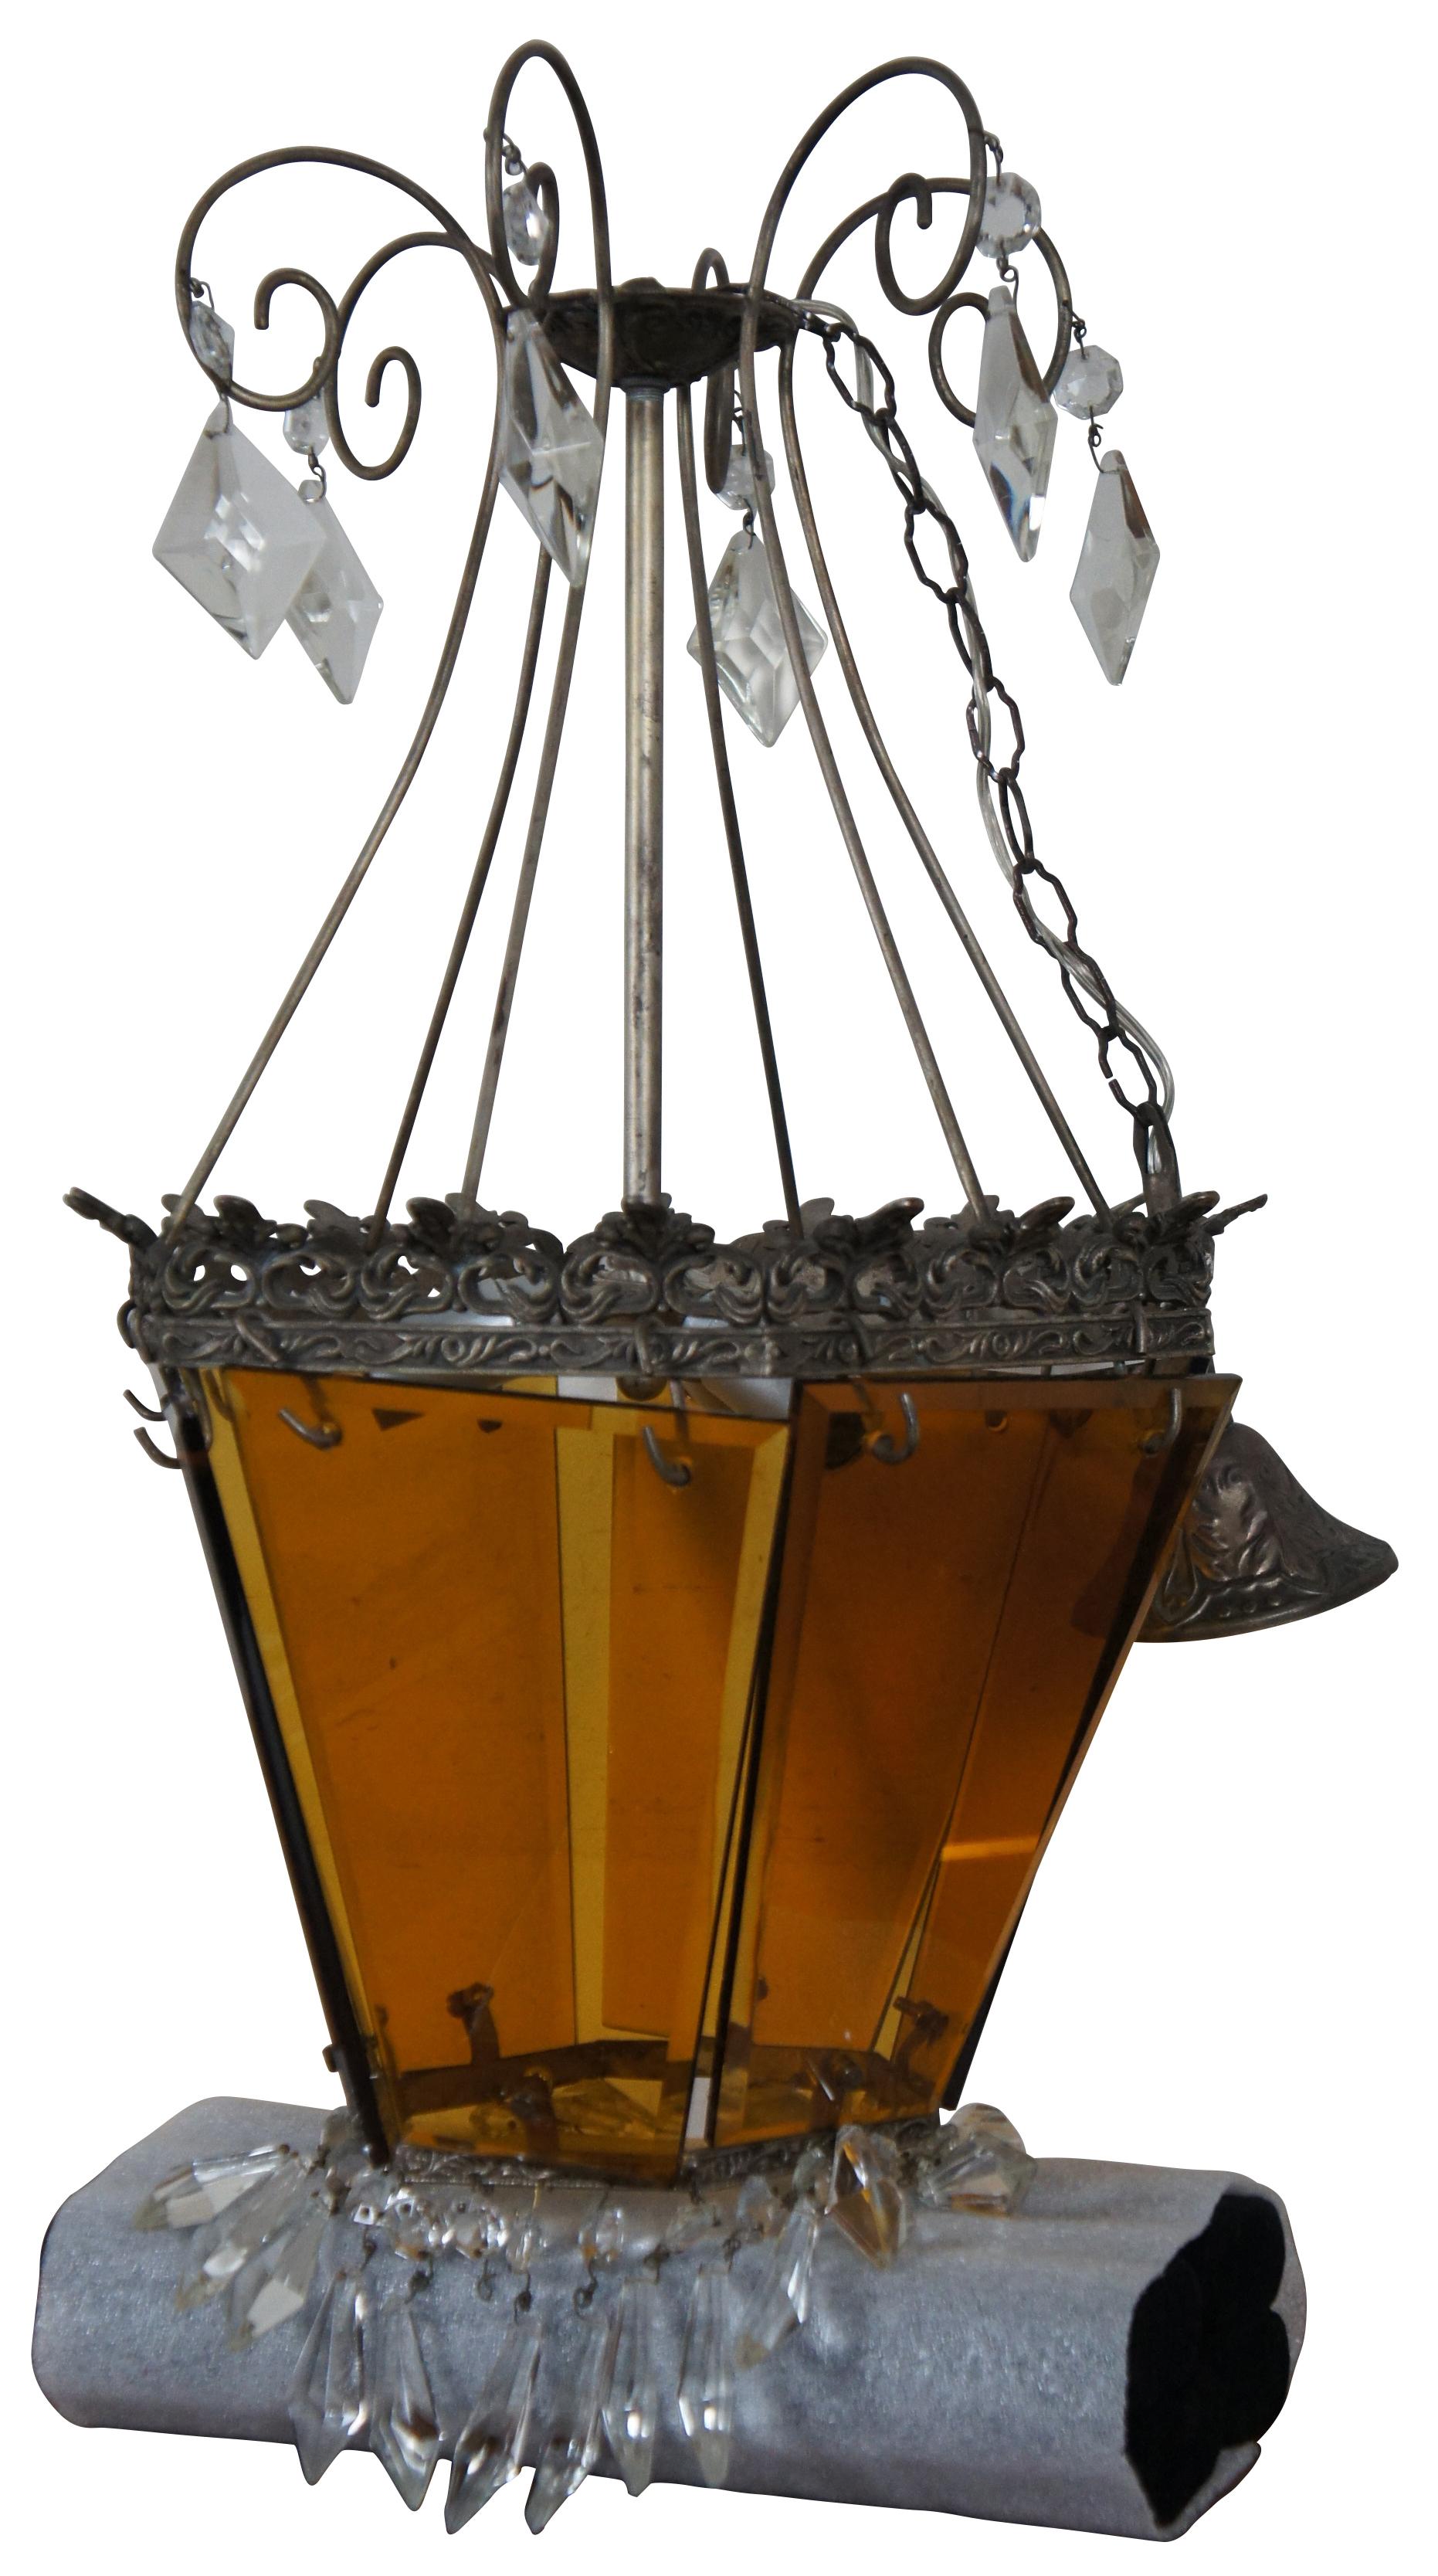 Vintage Hollywood Regency / Victorian / Gothic or Spanish Revival style pendant light or hanging lantern with scrolled metal accents, amber glass panels, and drop crystal borders.

Measures: 12.5” x 23” / Chain length – 16” (Diameter x